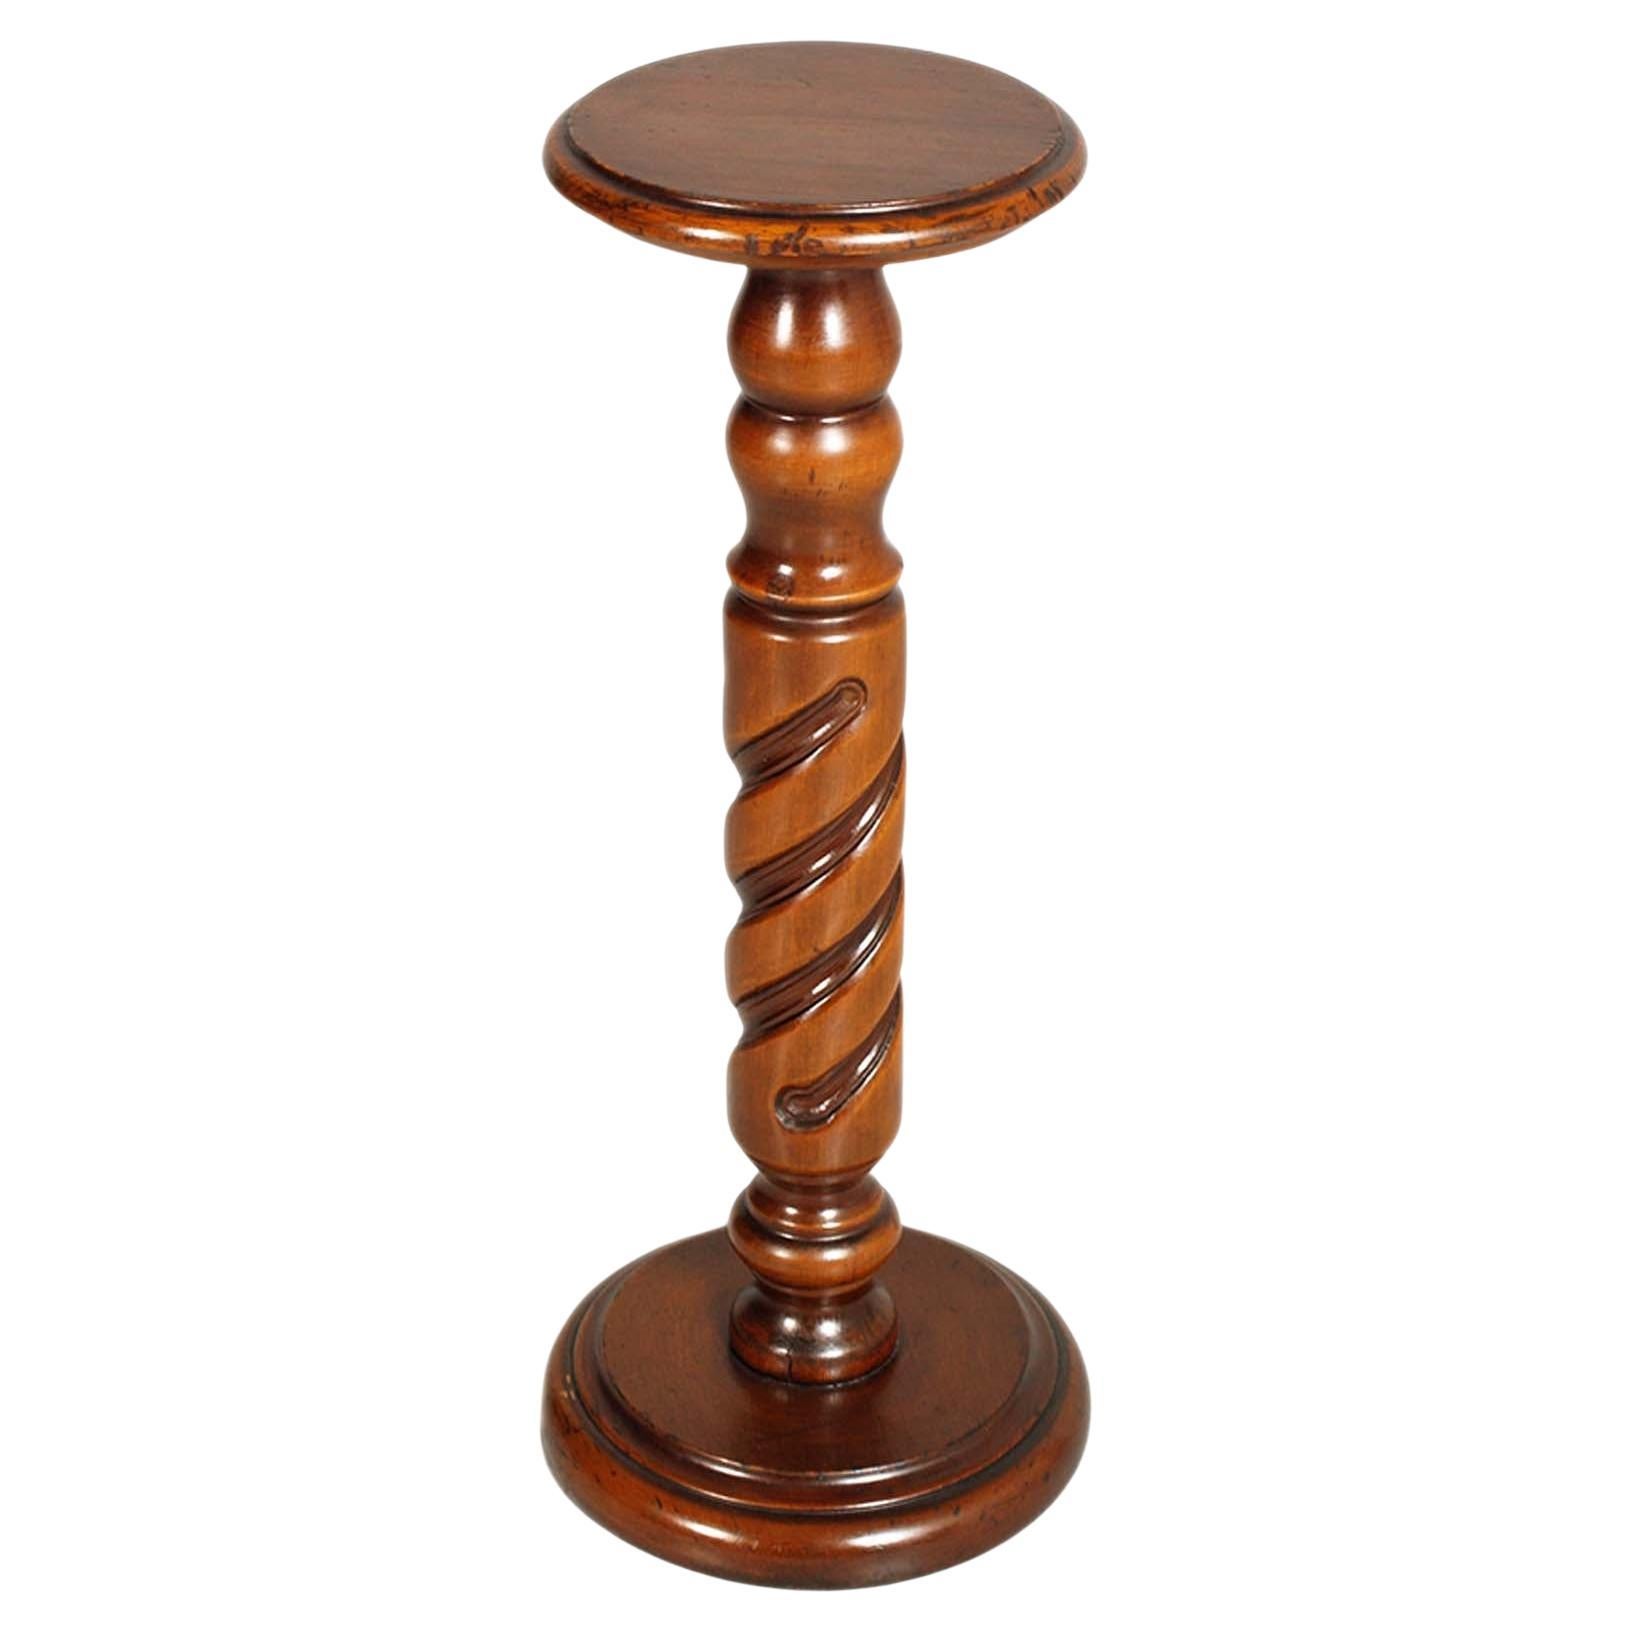 Twisted Walnut Column for Vase, Bust holder or Sculpture, 1940s, Gothic Style